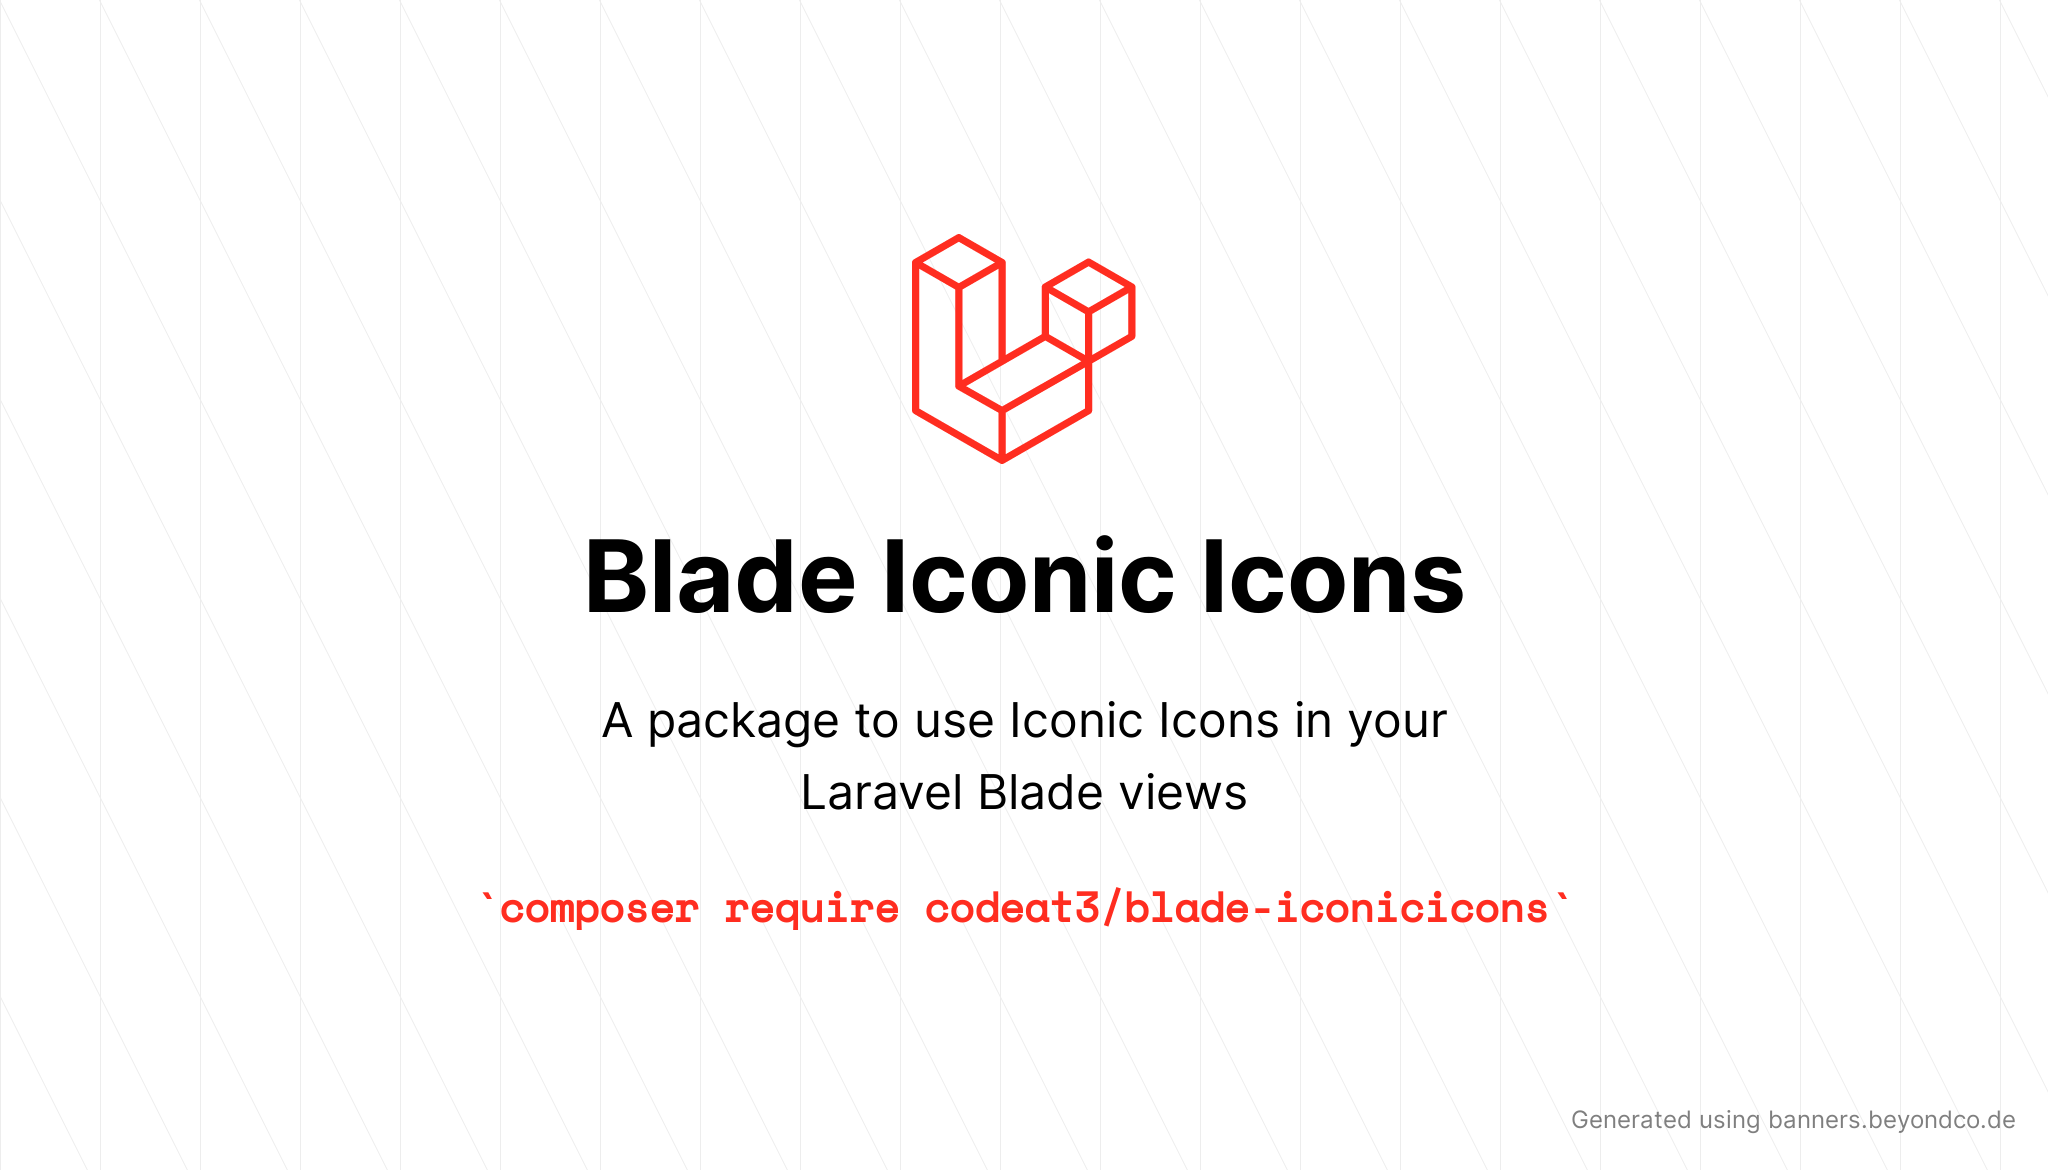 socialcard-blade-iconicicons.png